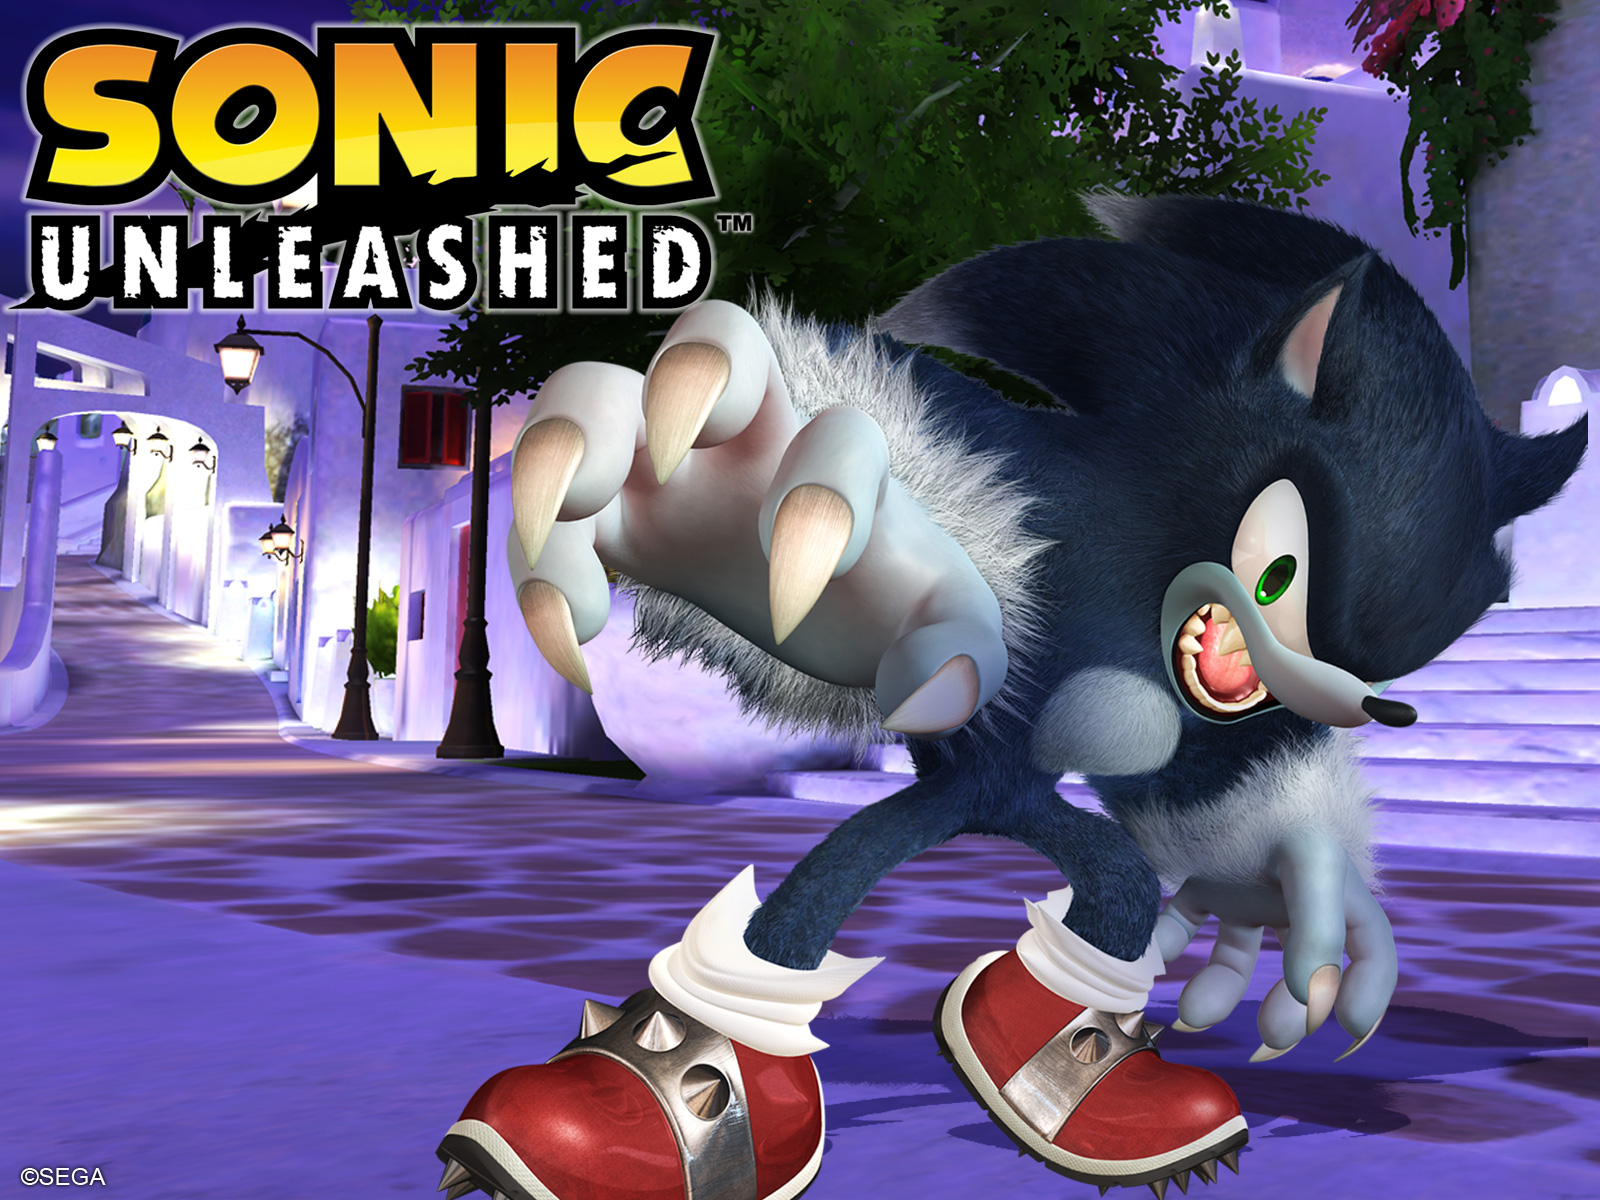 Sonic Unleashed Nintendo GameCube (2008) by SonicLoud1213 on DeviantArt